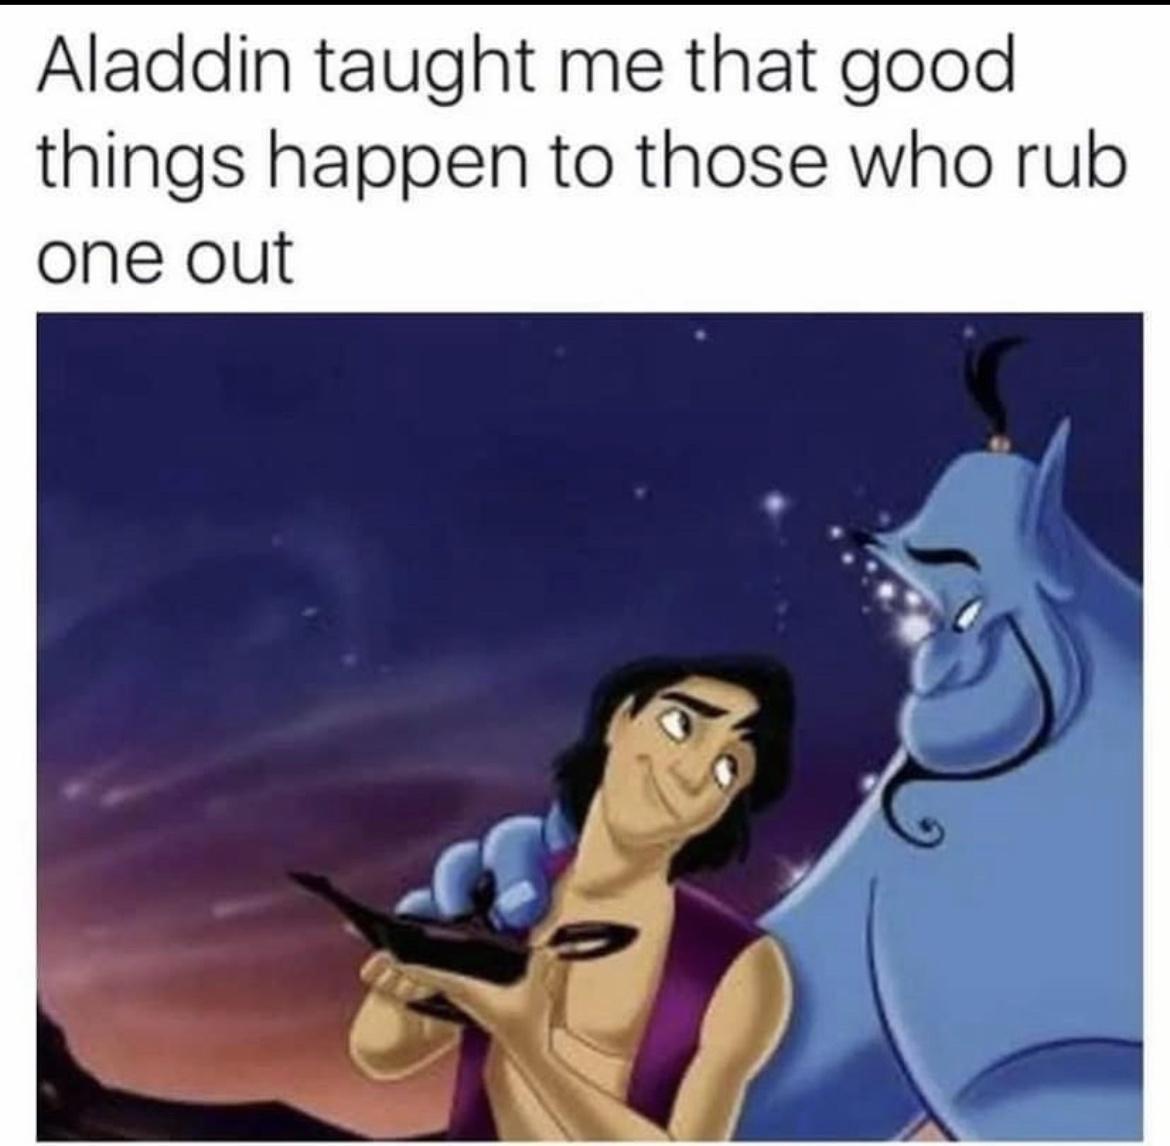 Fresh Pics And Memes - cartoon - Aladdin taught me that good things happen to those who rub one out